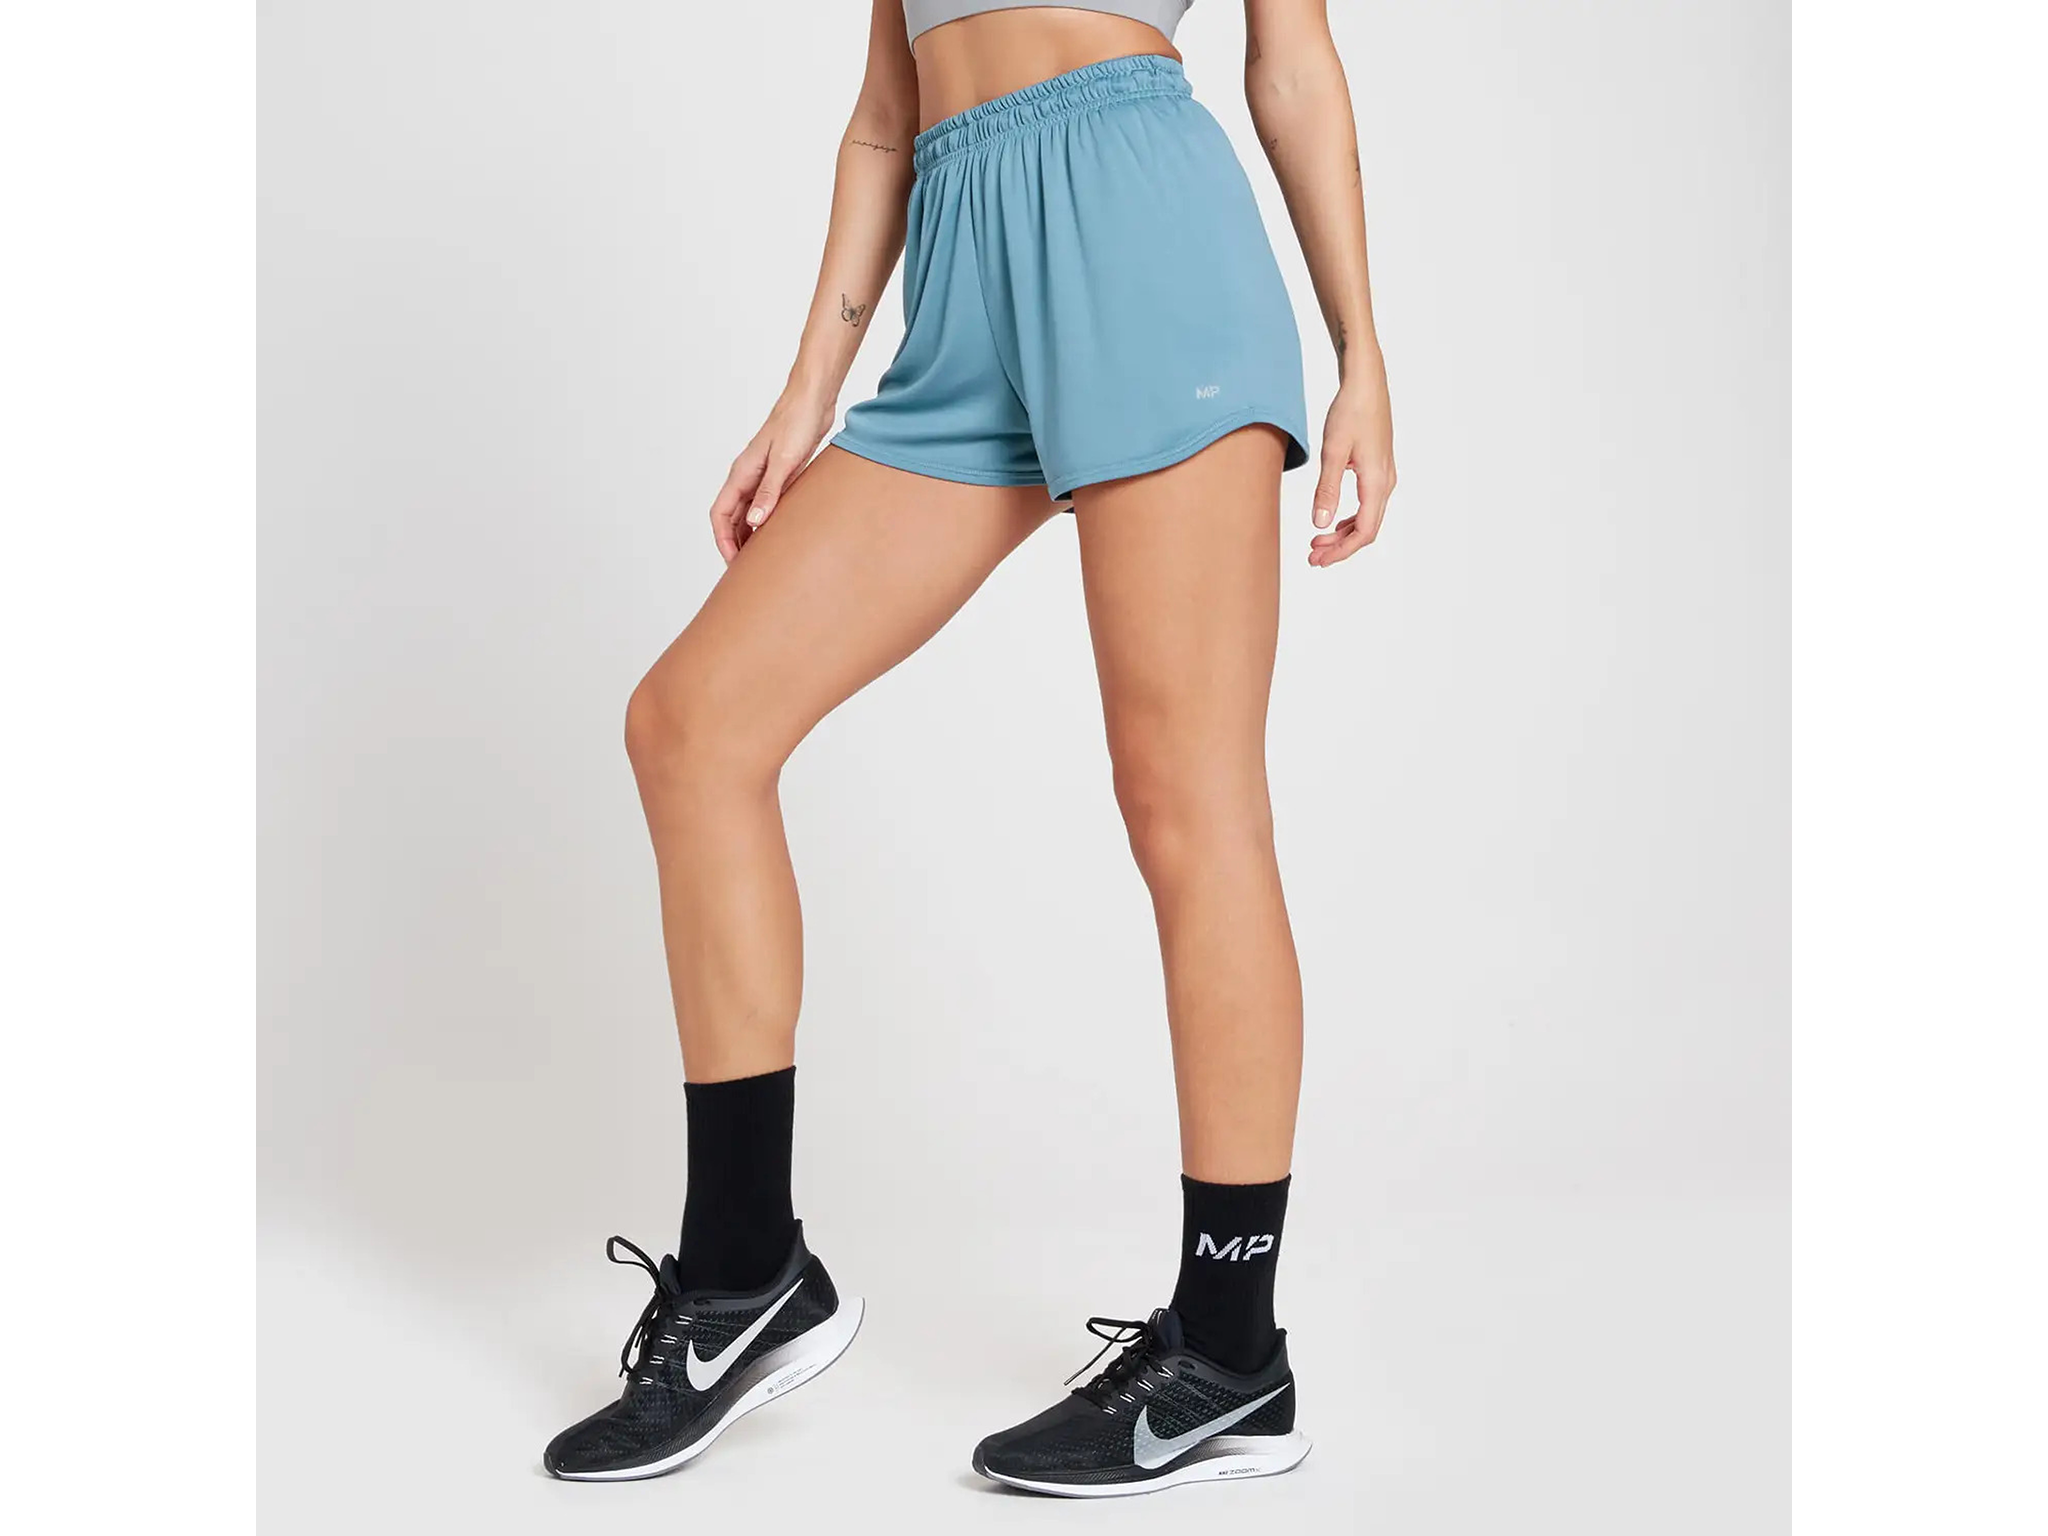 MP women’s velocity jersey shorts.png